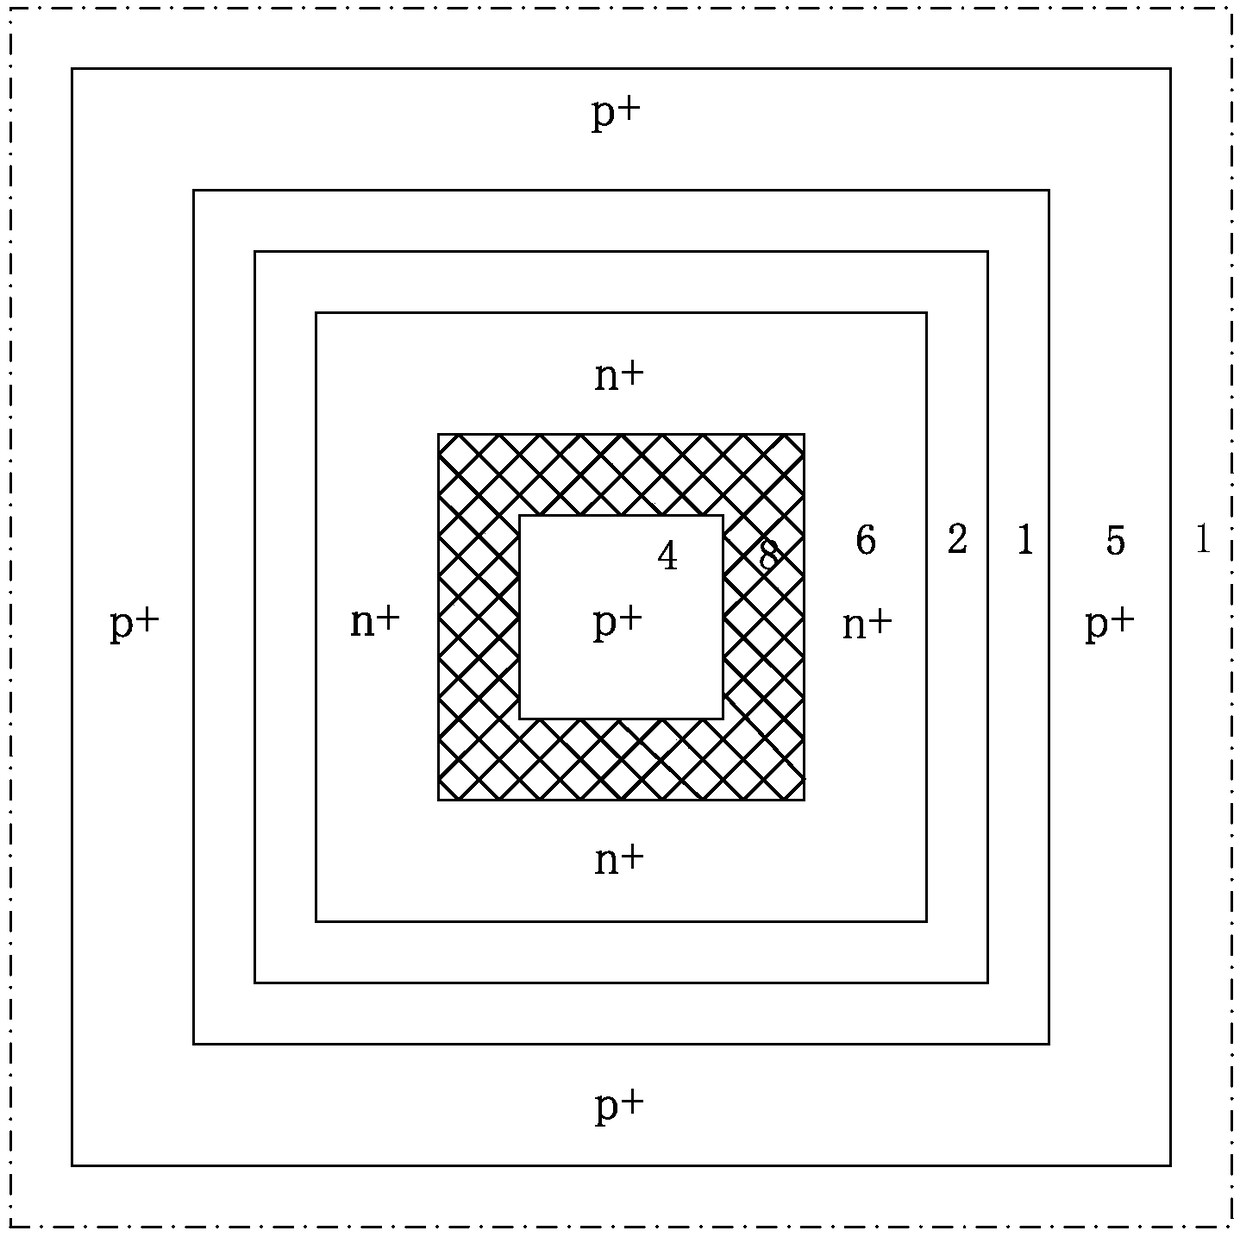 PNP transistor structure resistant to total dose irradiation